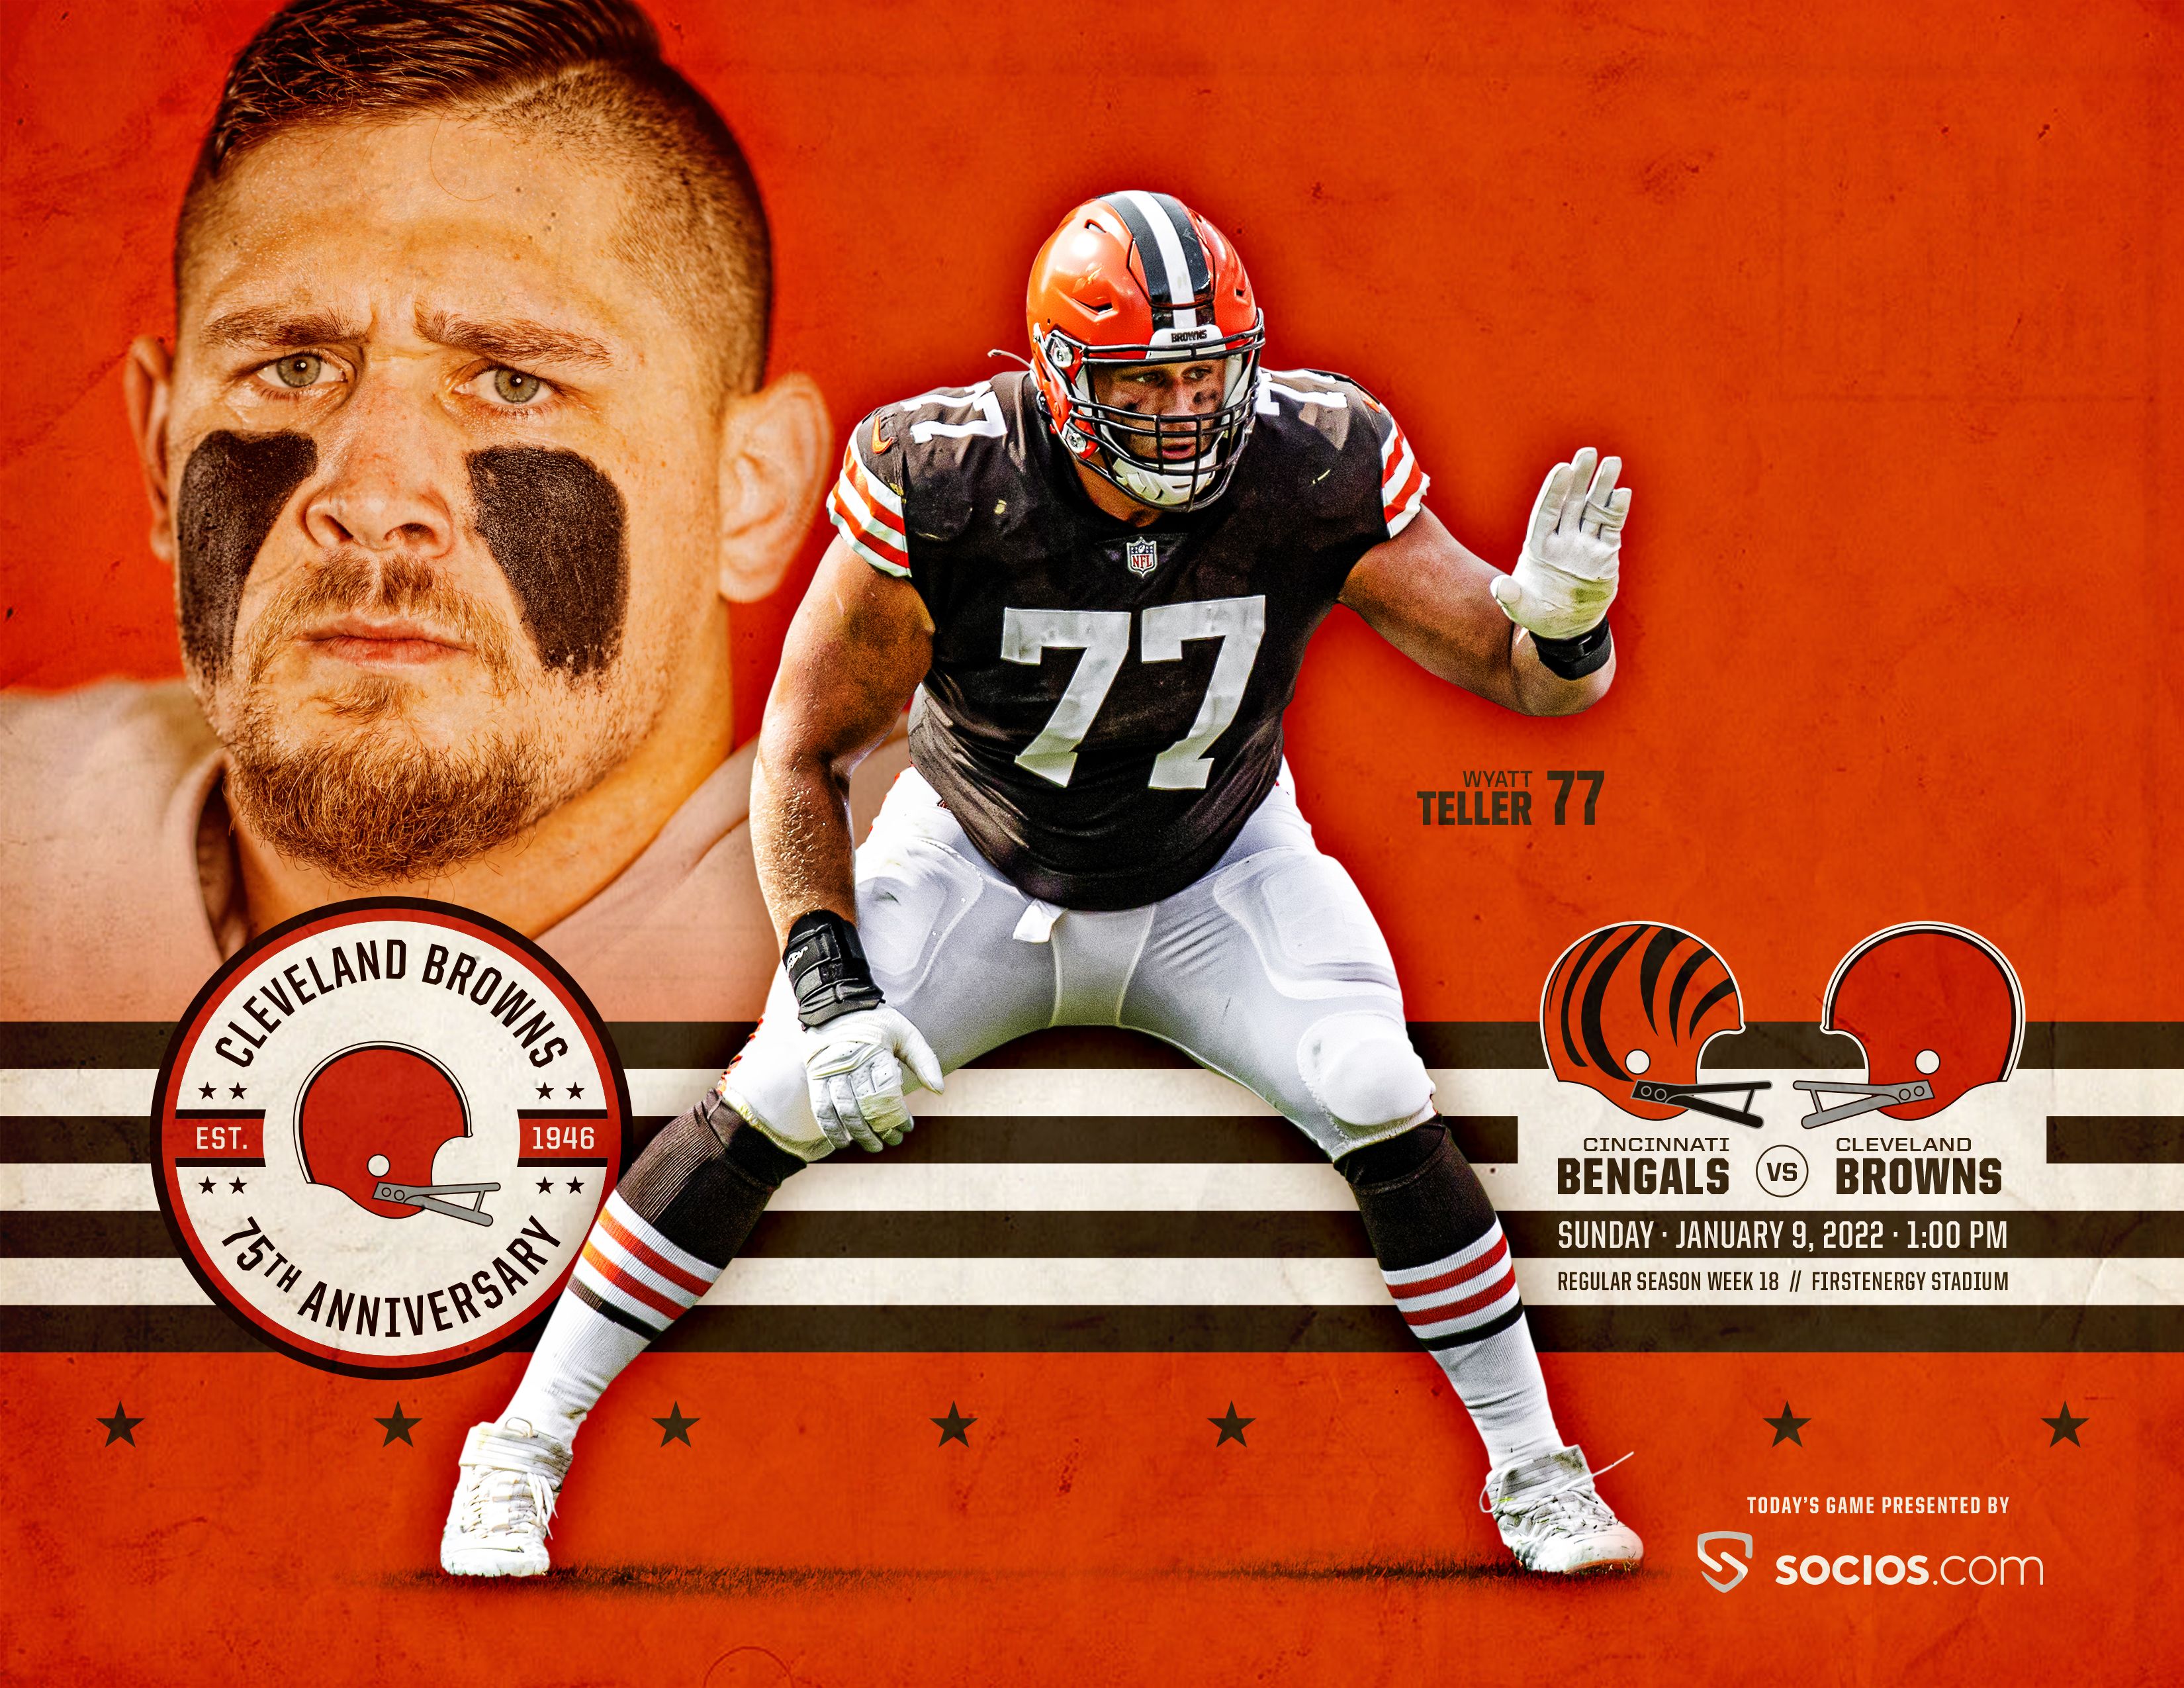 Cleveland Browns on Twitter new month new FanFriday  Desere Mayo  amp Aaron Clawson httpstcohdtJzeUt2y  X